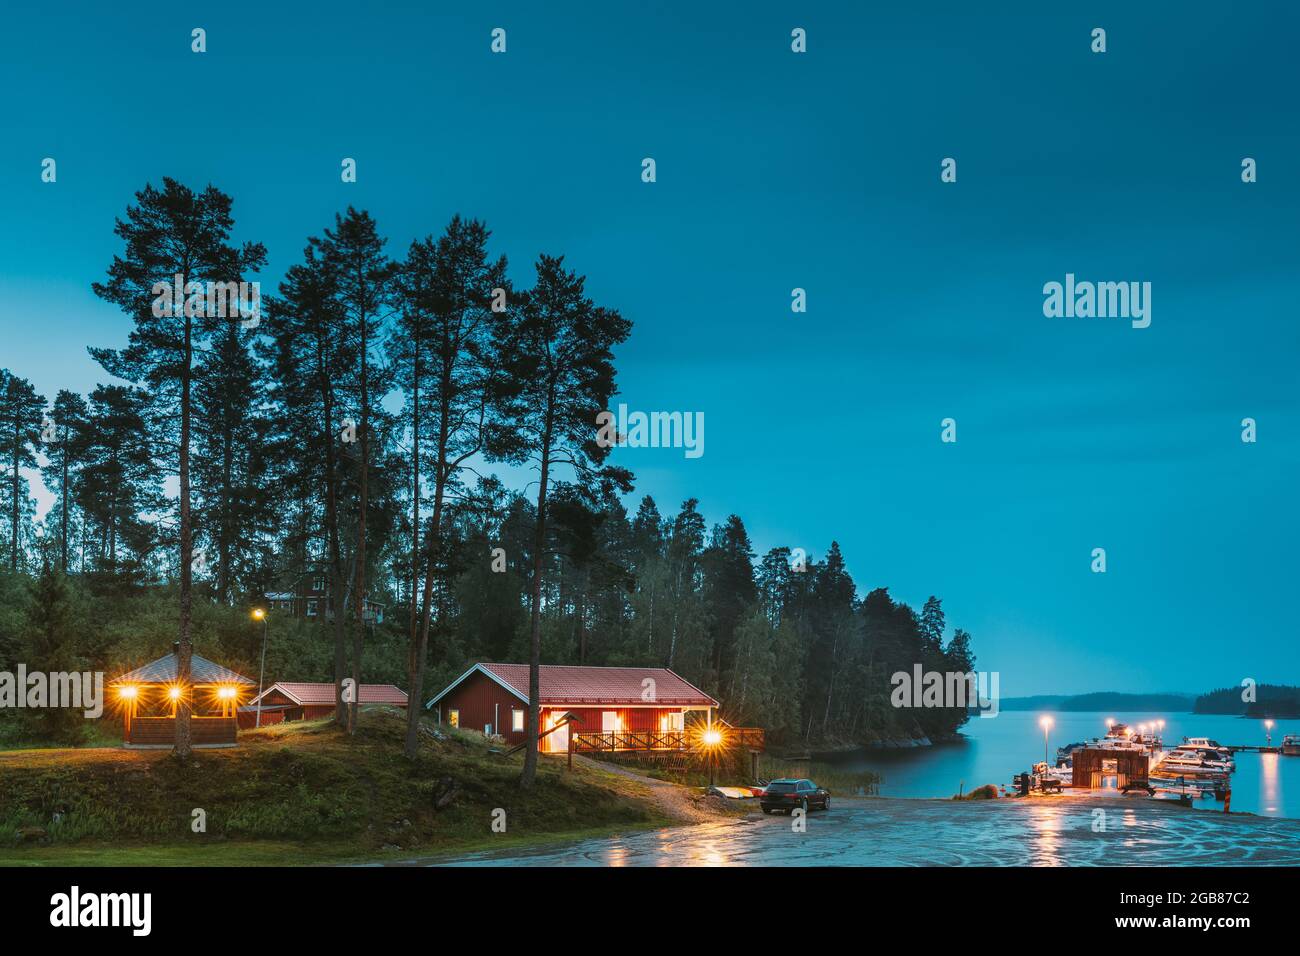 Sweden. Sweden. Beautiful Red Swedish Wooden Log Cabin House On Rocky Island Coast In Summer Night Evening. Lake Or River Landscape. Beautiful Wooden Stock Photo